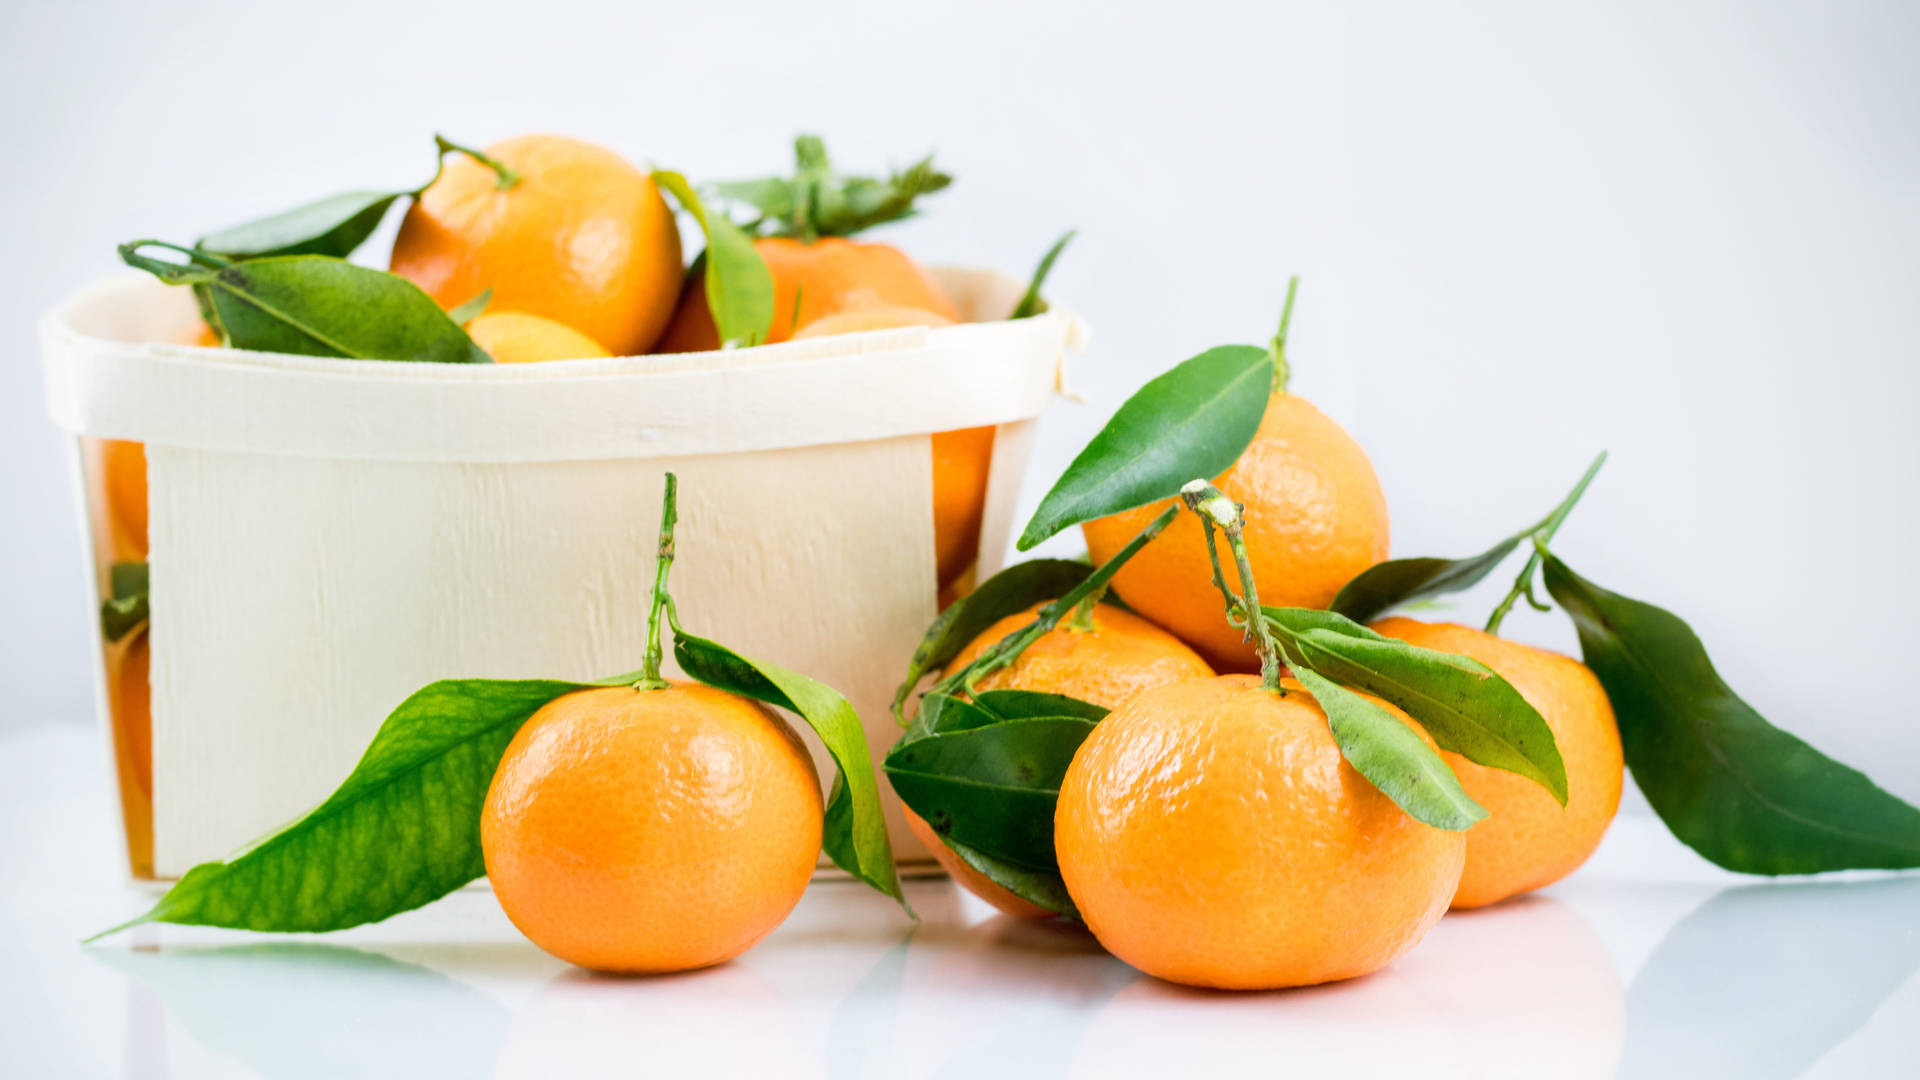 Fresh Clementine Citrus Fruits in a White Basket Wallpaper